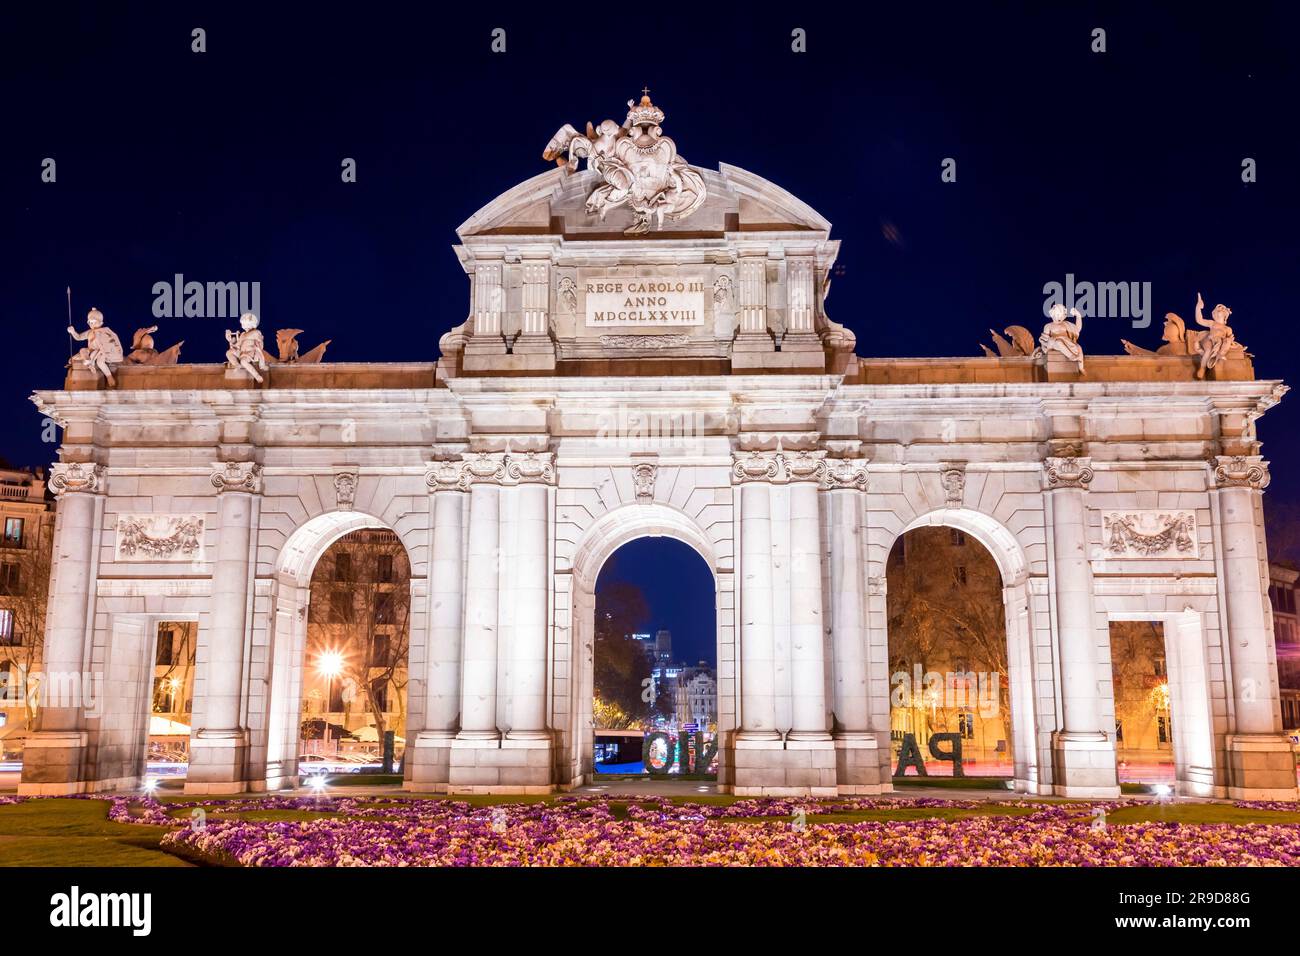 Madrid, Spain-Feb 17, 2022: The Puerta de Alcala is a Neo-classical gate in the Plaza de la Independencia in Madrid, Spain. Stock Photo